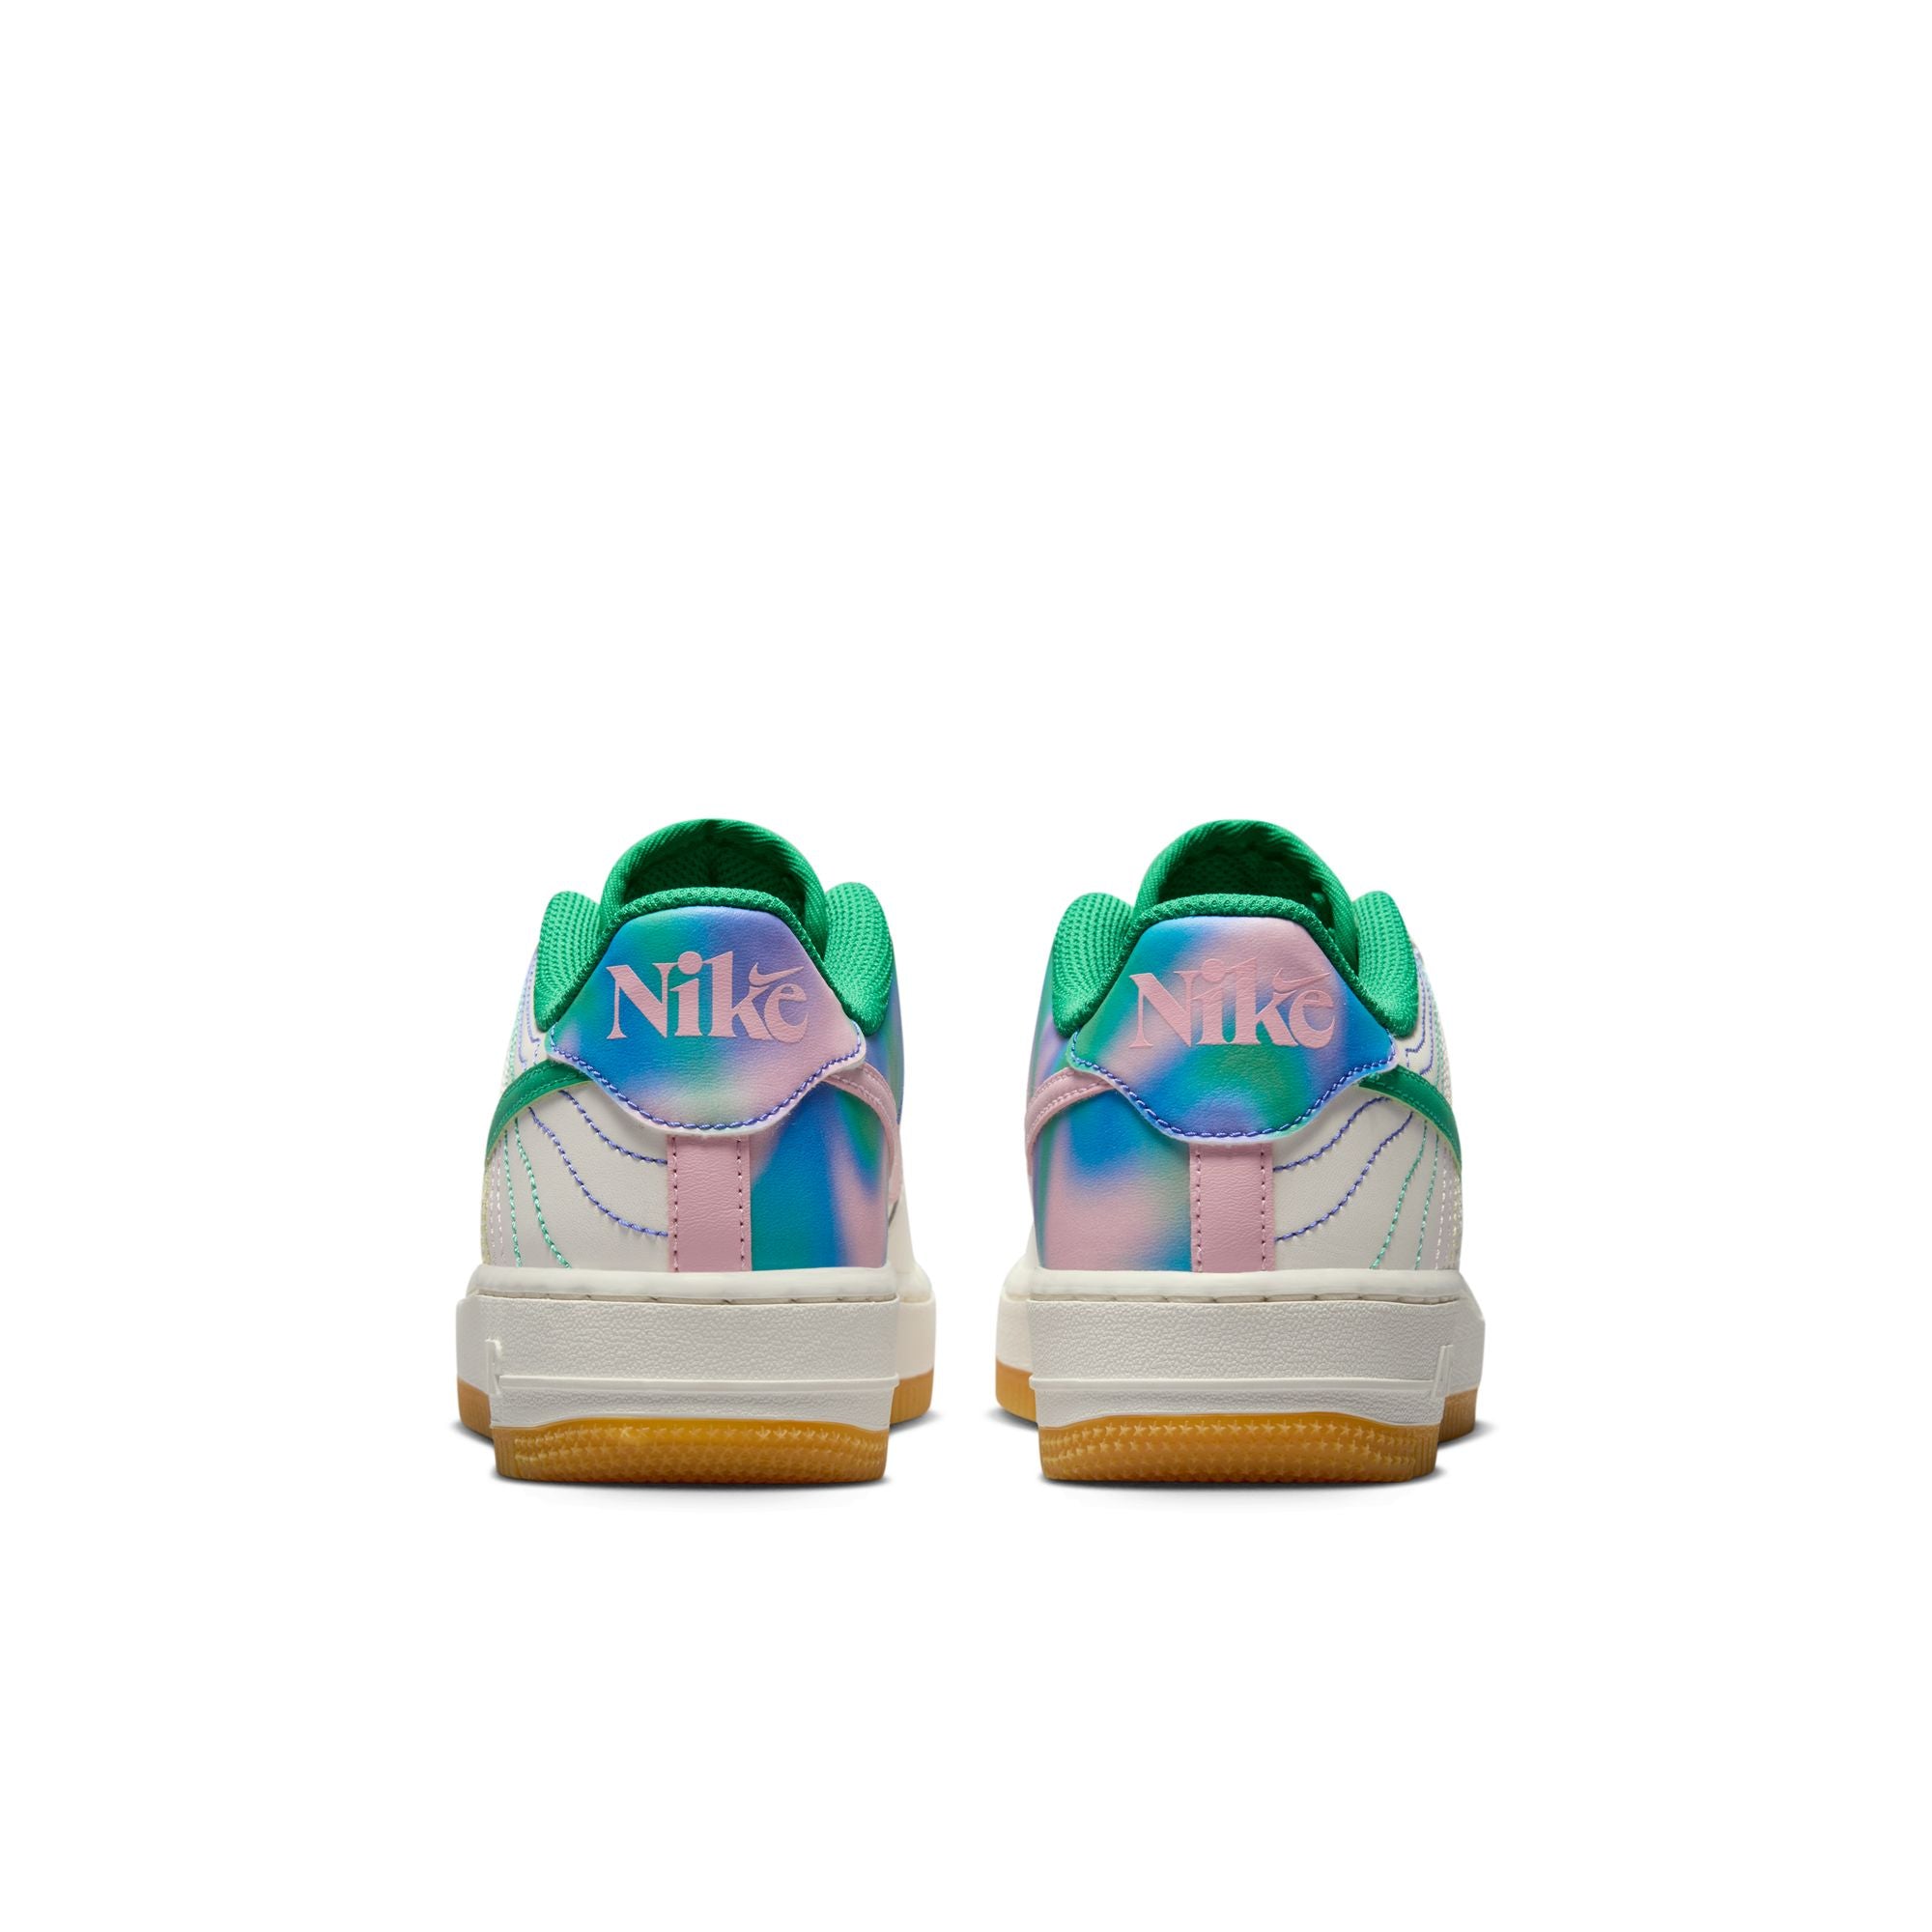 Youth Nike Air Force 1 LV8 3 'Heel Stitch'